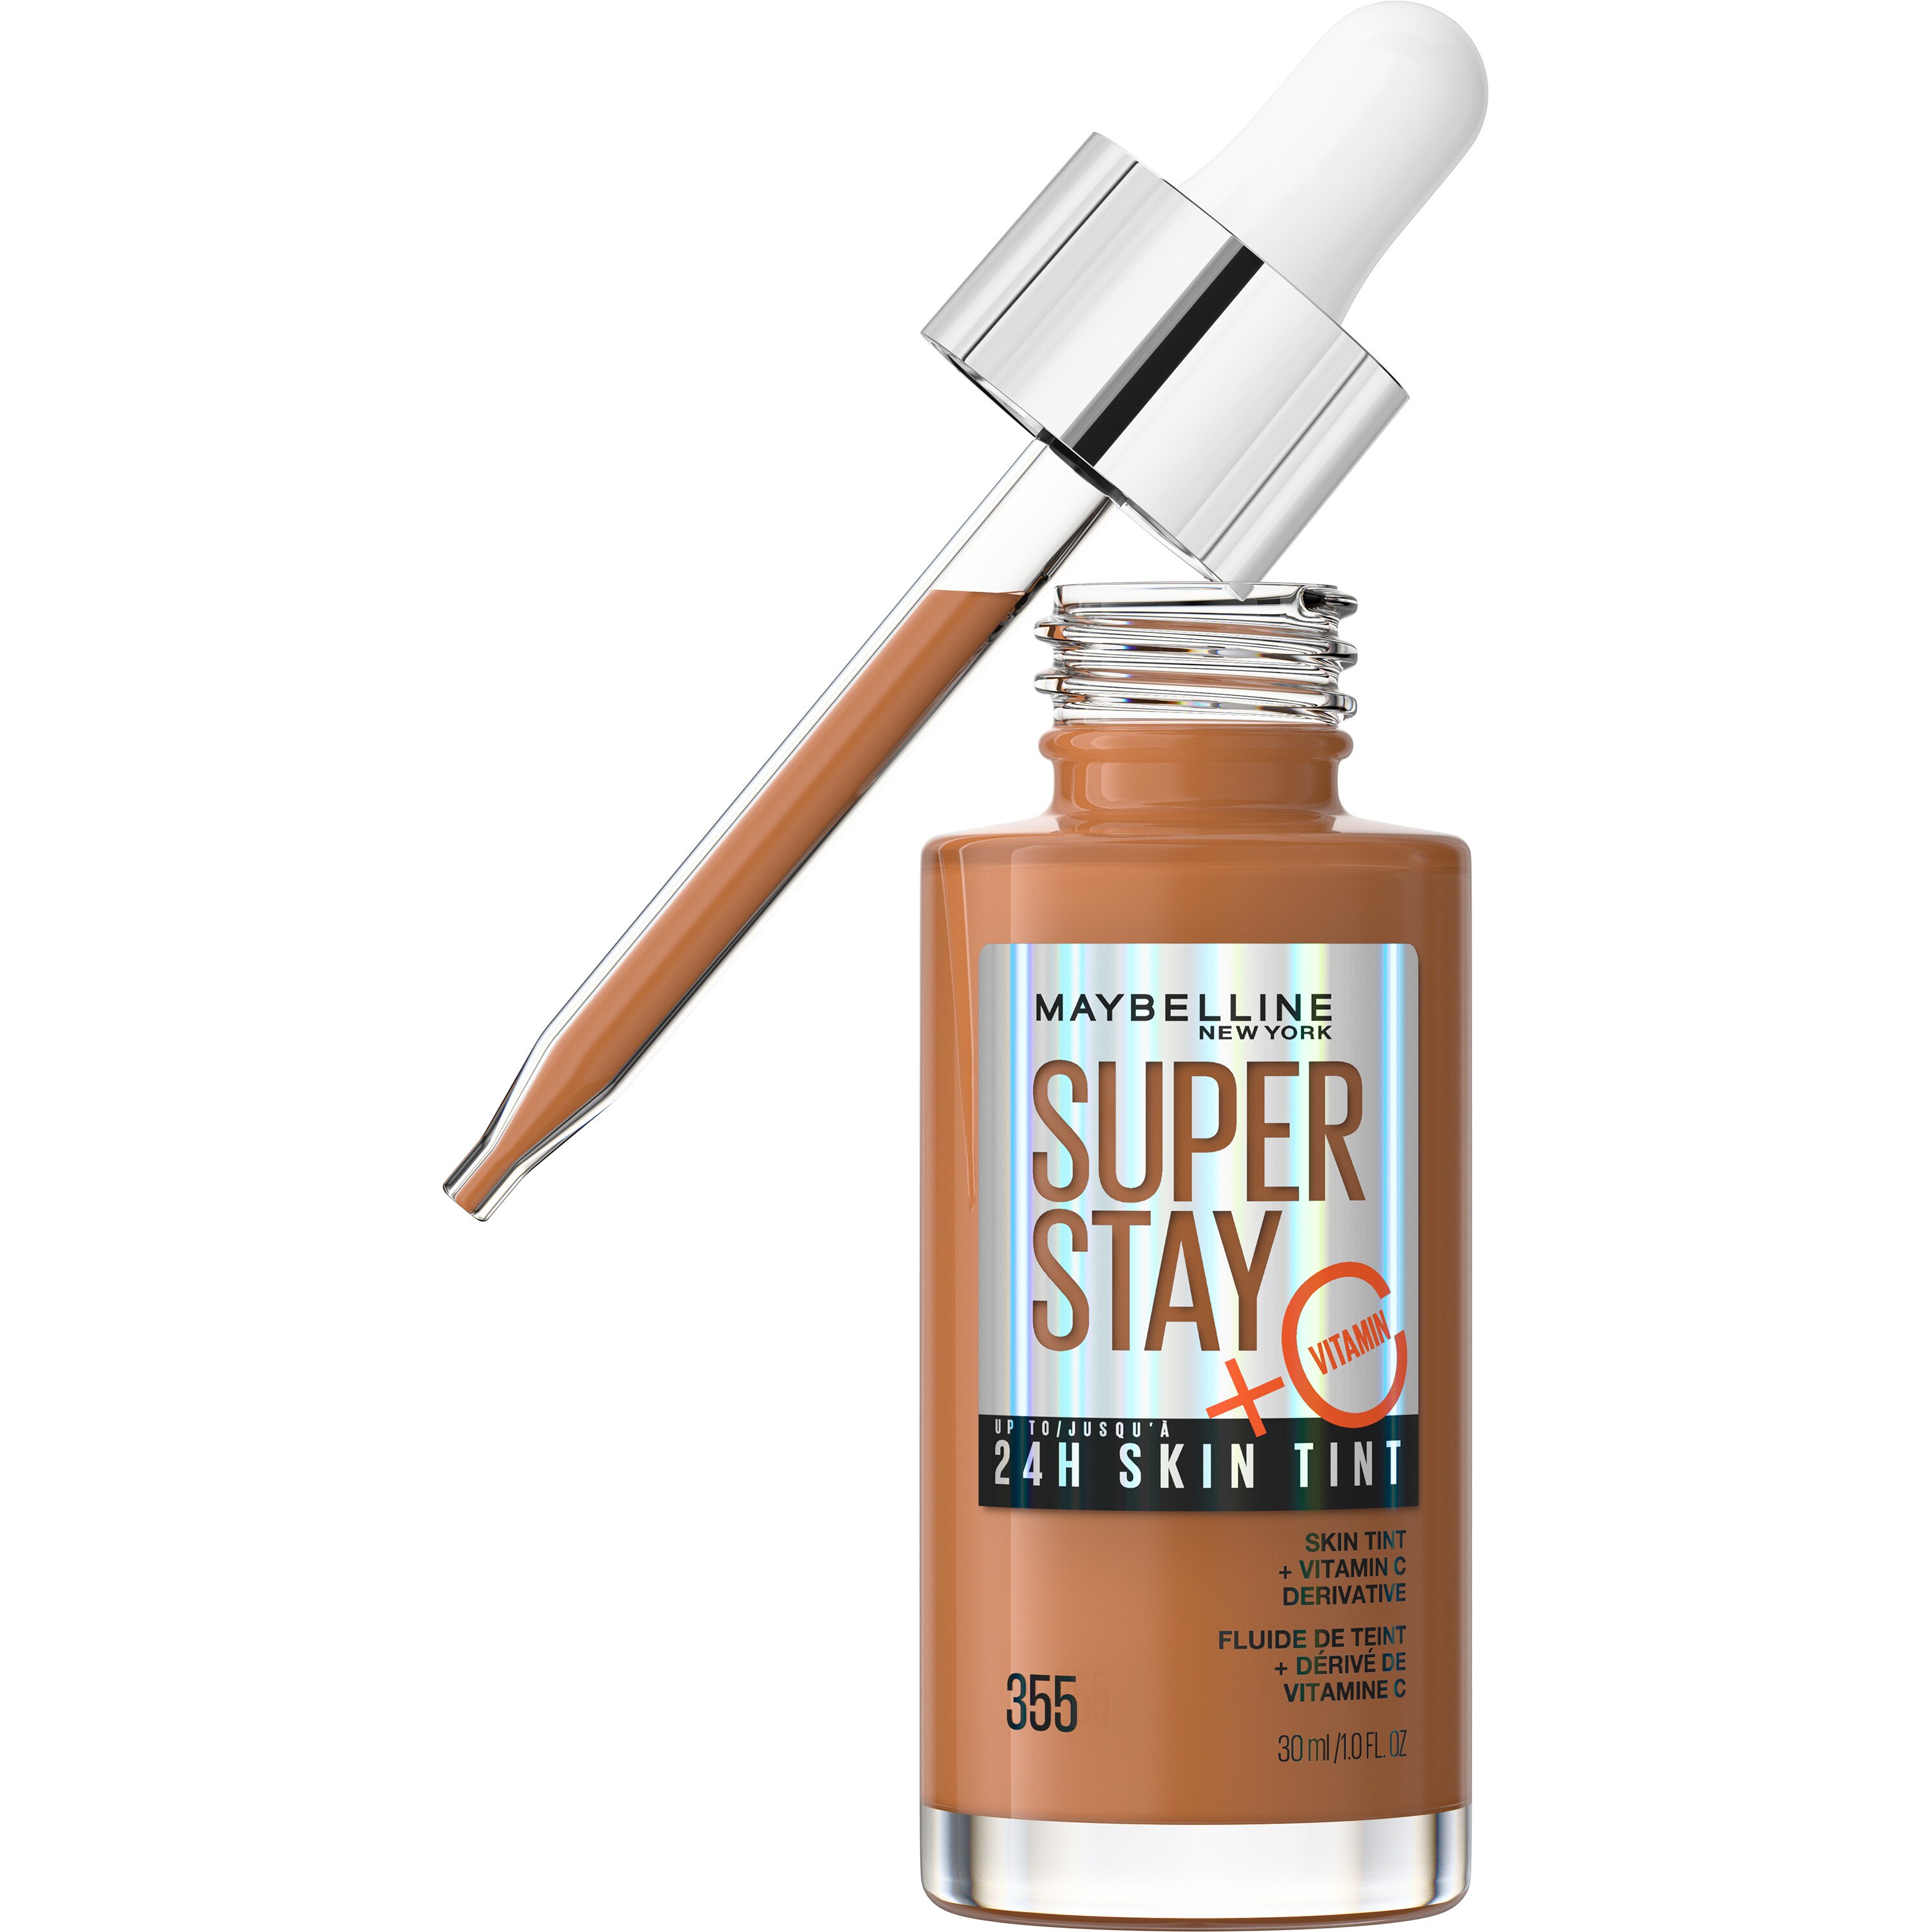 Maybelline New York Super Stay Up To 24HR Skin Tint With Vitamin C, 355, 1 Oz , CVS